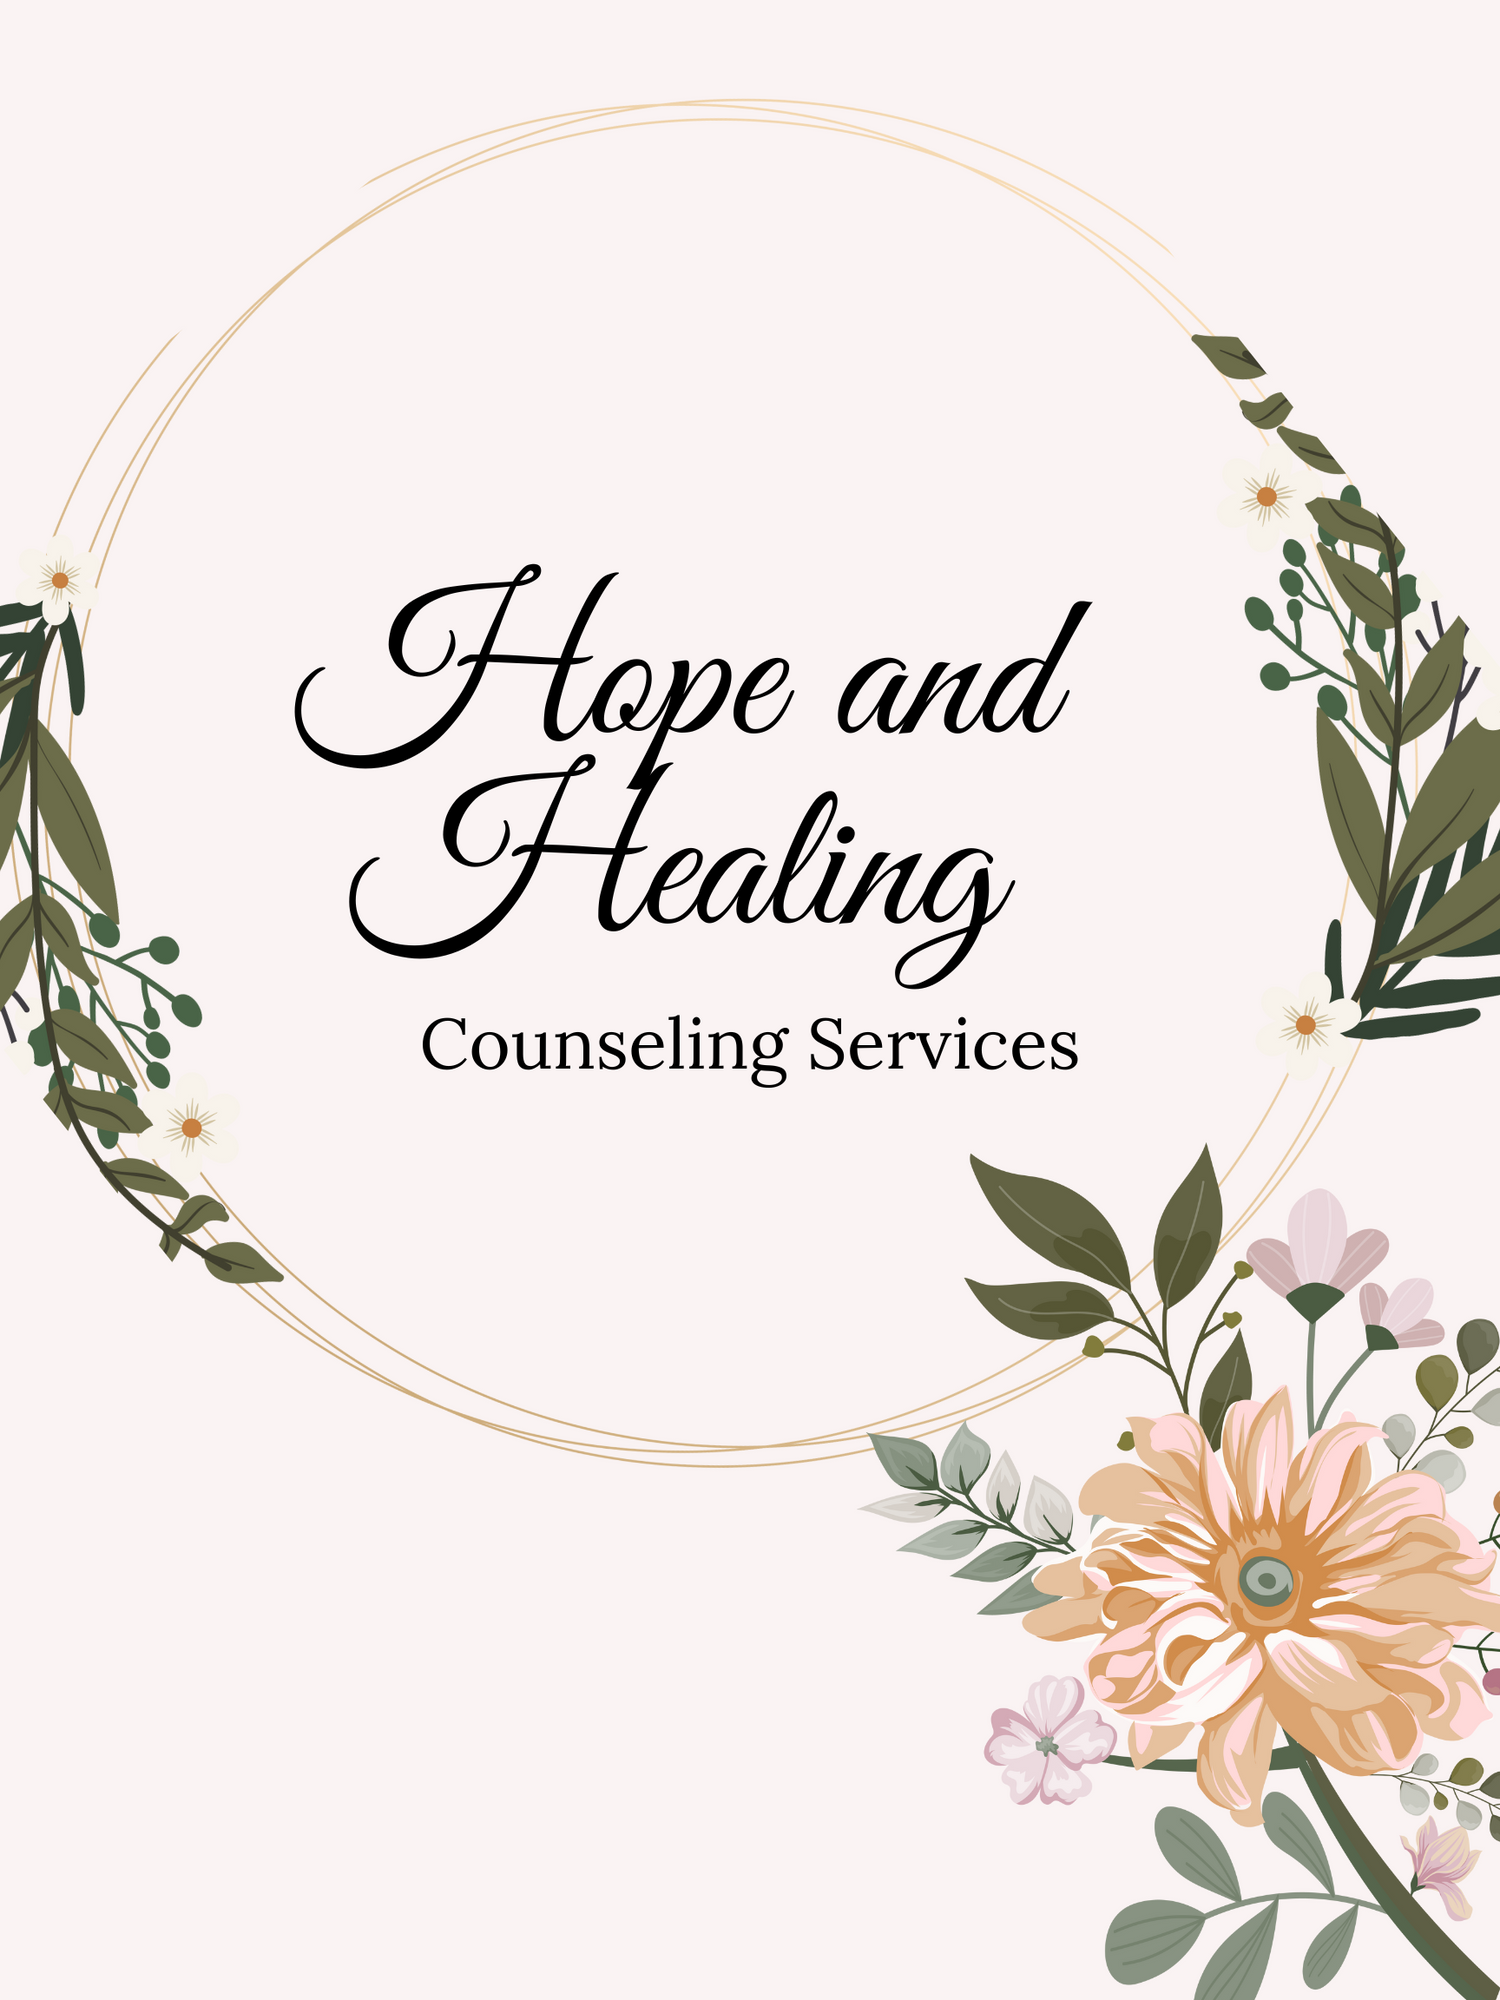 Gallery Photo of Hope & Healing Counseling Services